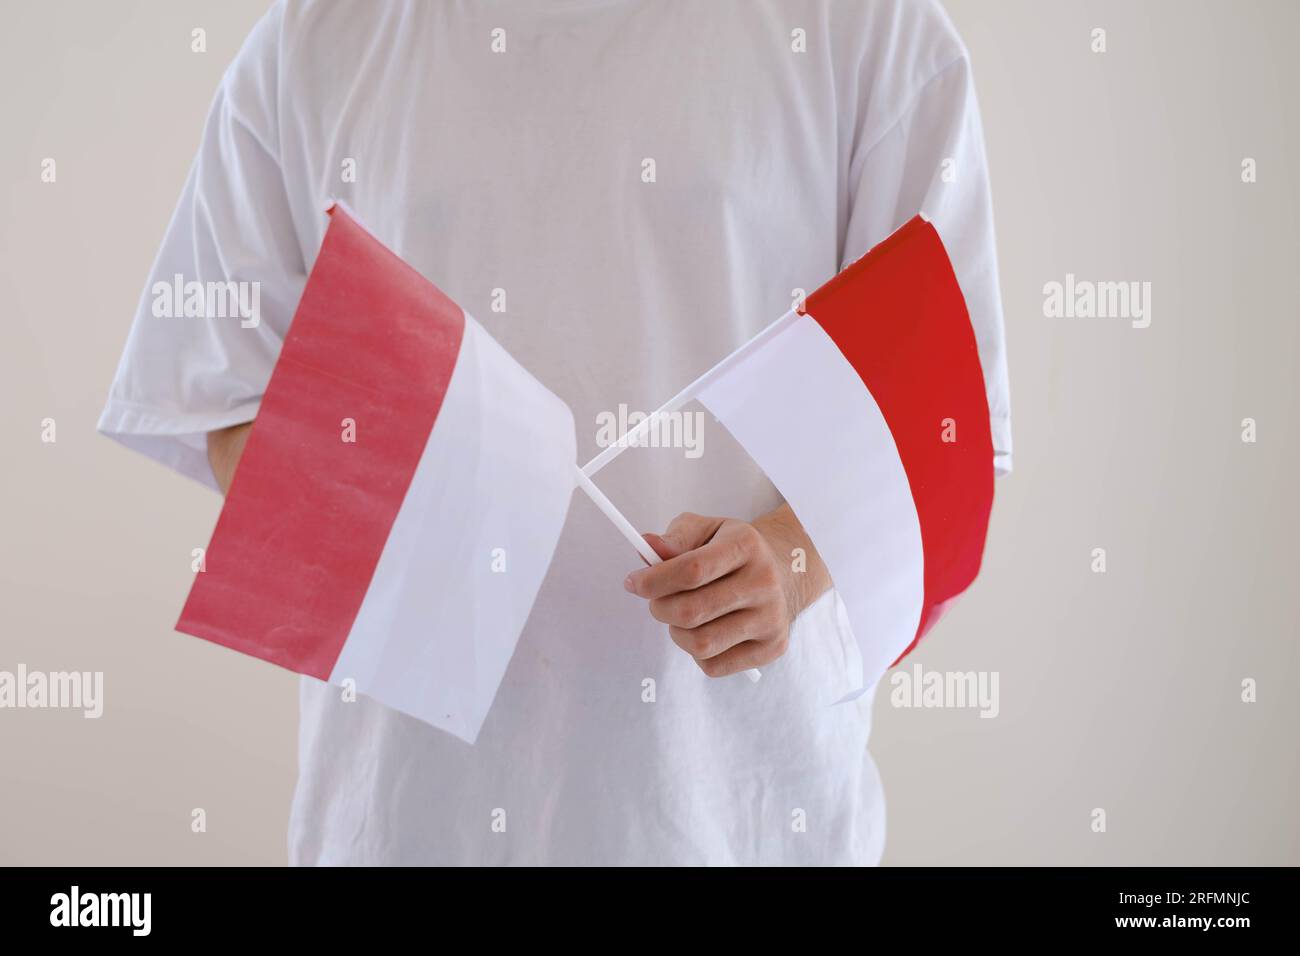 A man wearing white T-Shirt is holding Bendera Indonesia or Indonesian flag on isolated white background. Stock Photo